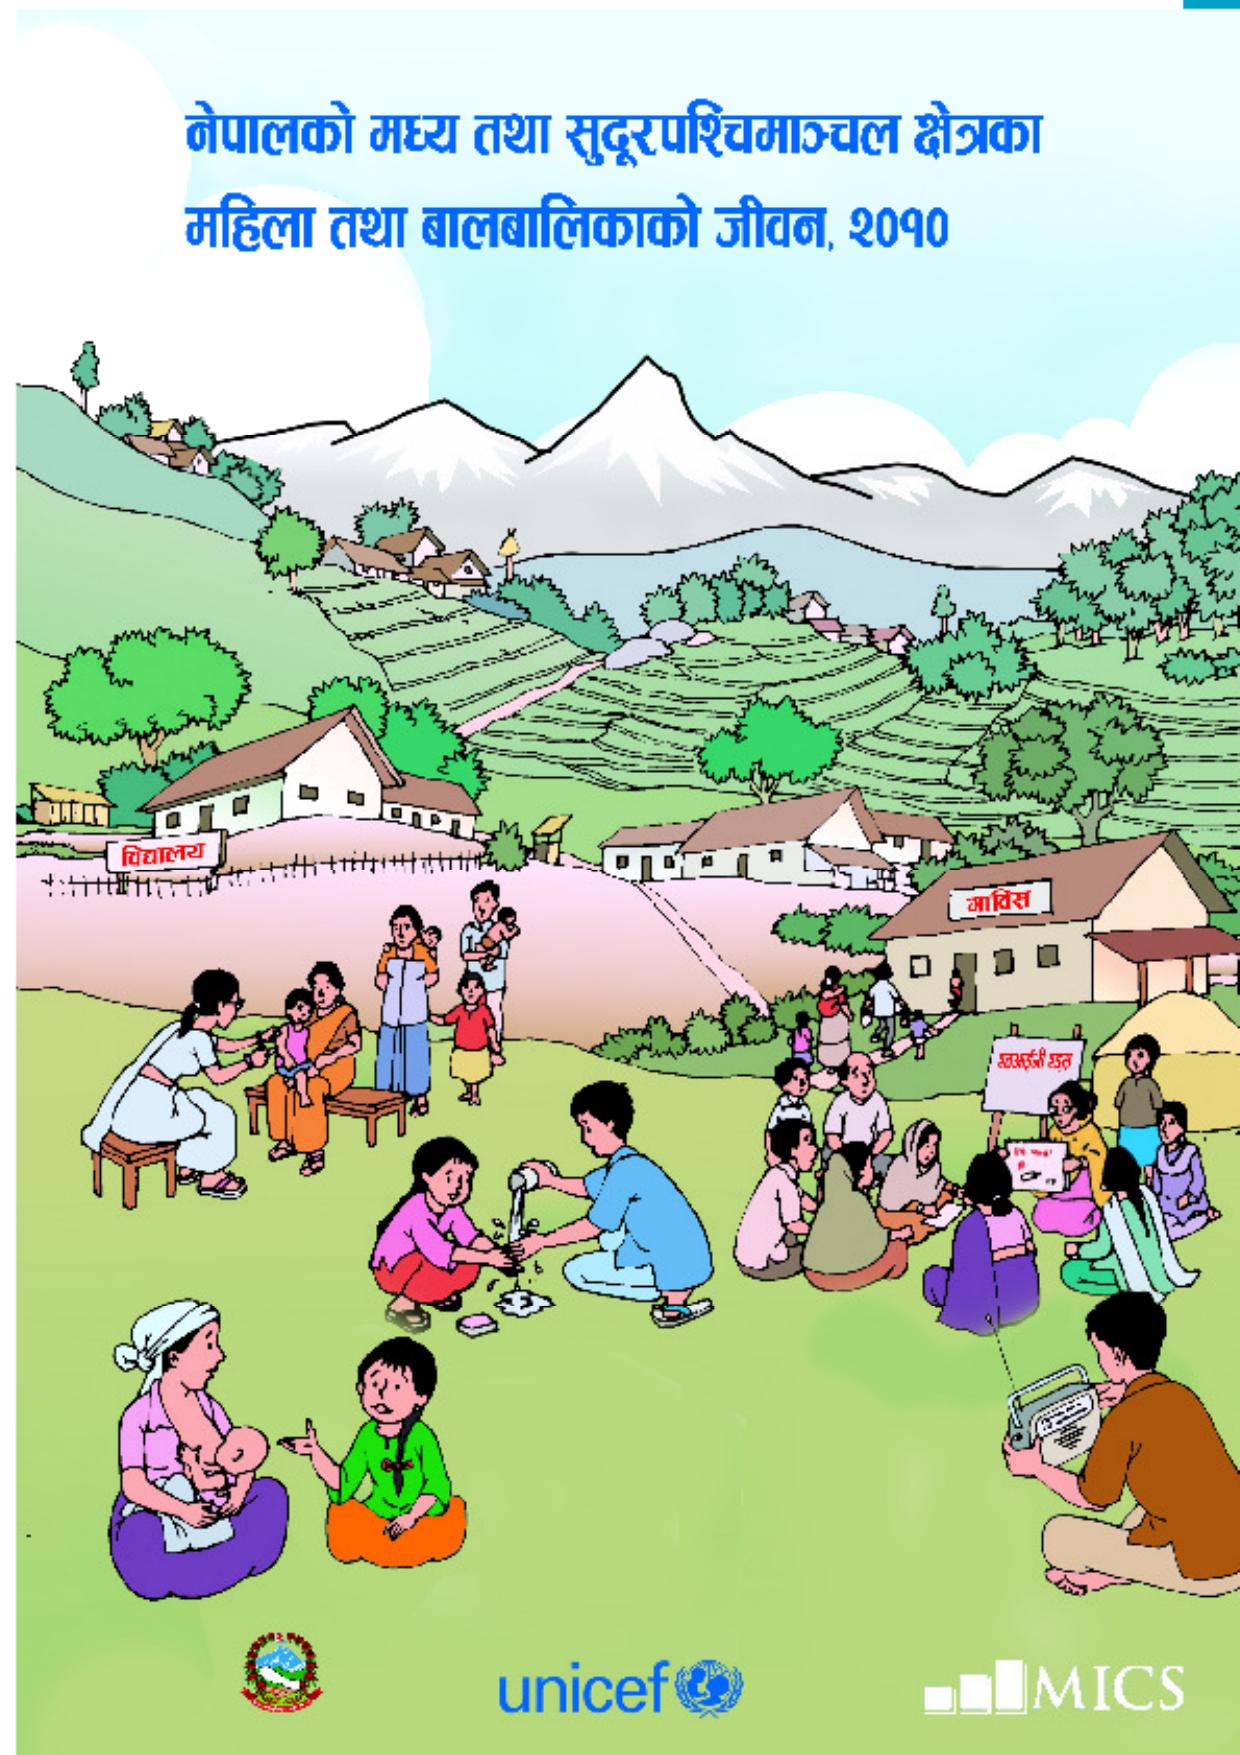 नेपालको मधय तथा सुदुरपशचिमानचल Lives of Children and Women in Mid and Far Weastren Rerion of Nepal